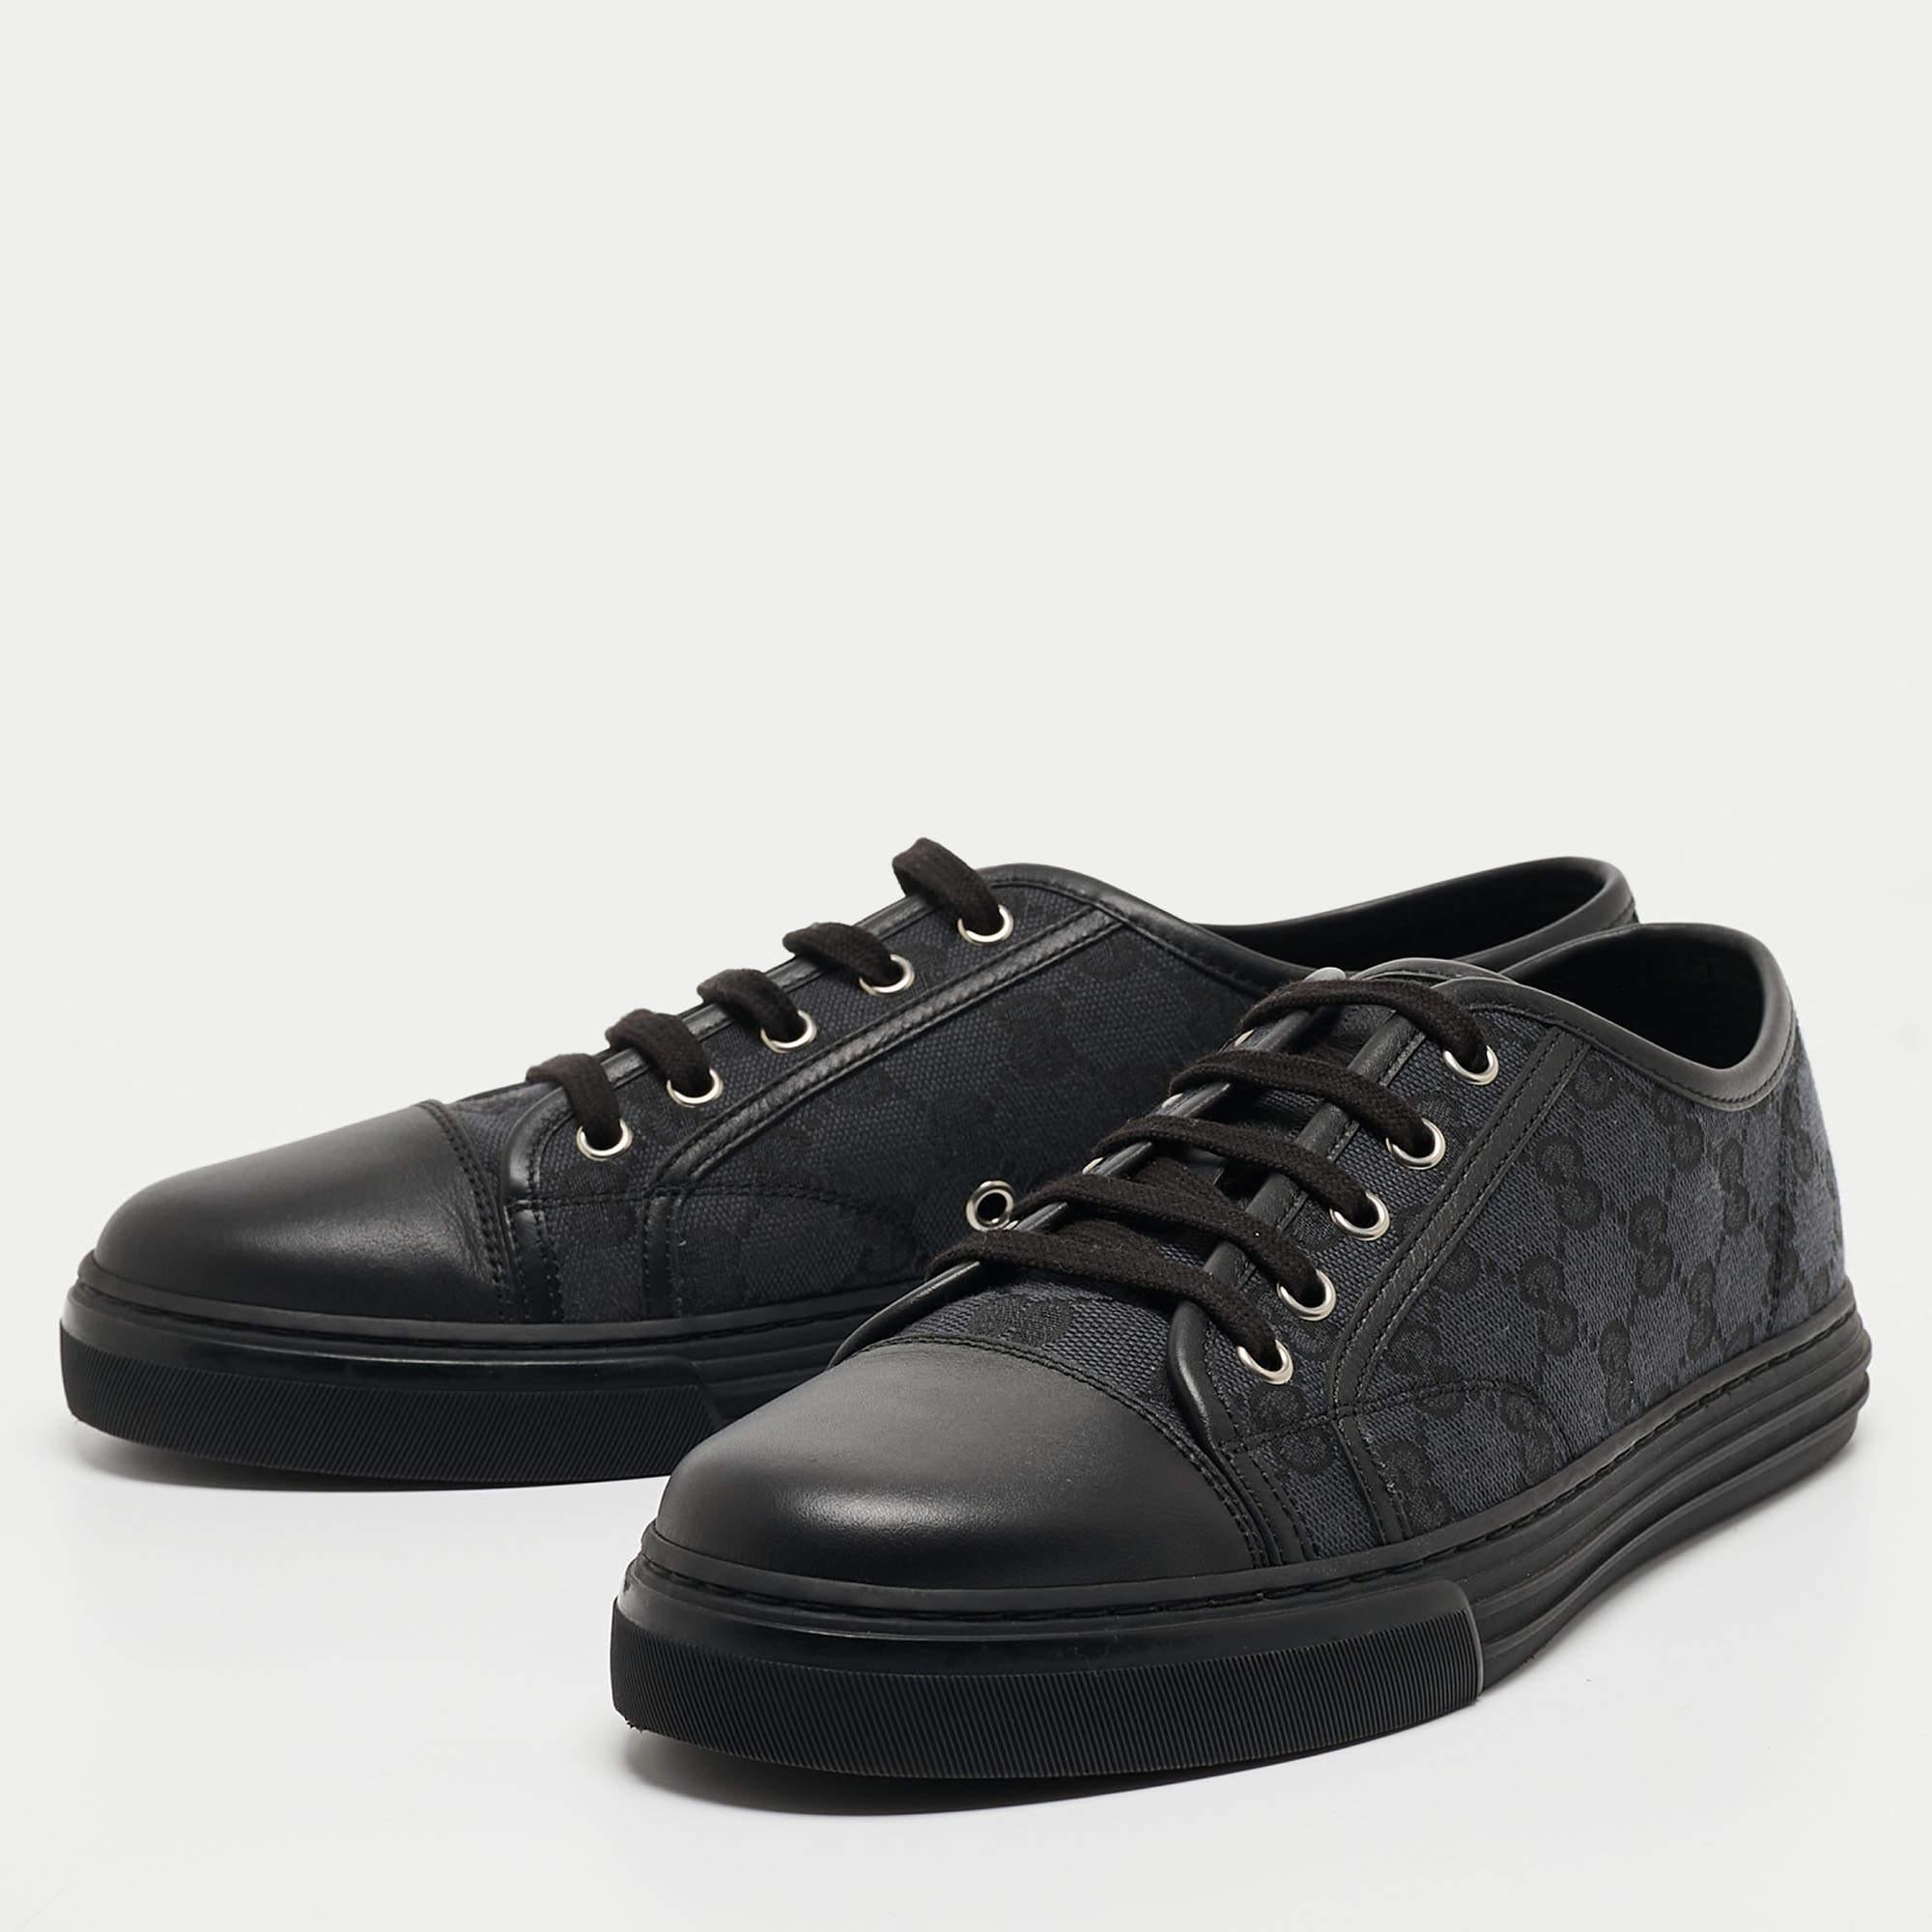 Gucci Black GG Canvas and Leather Low Top Sneakers Size 41.5 3